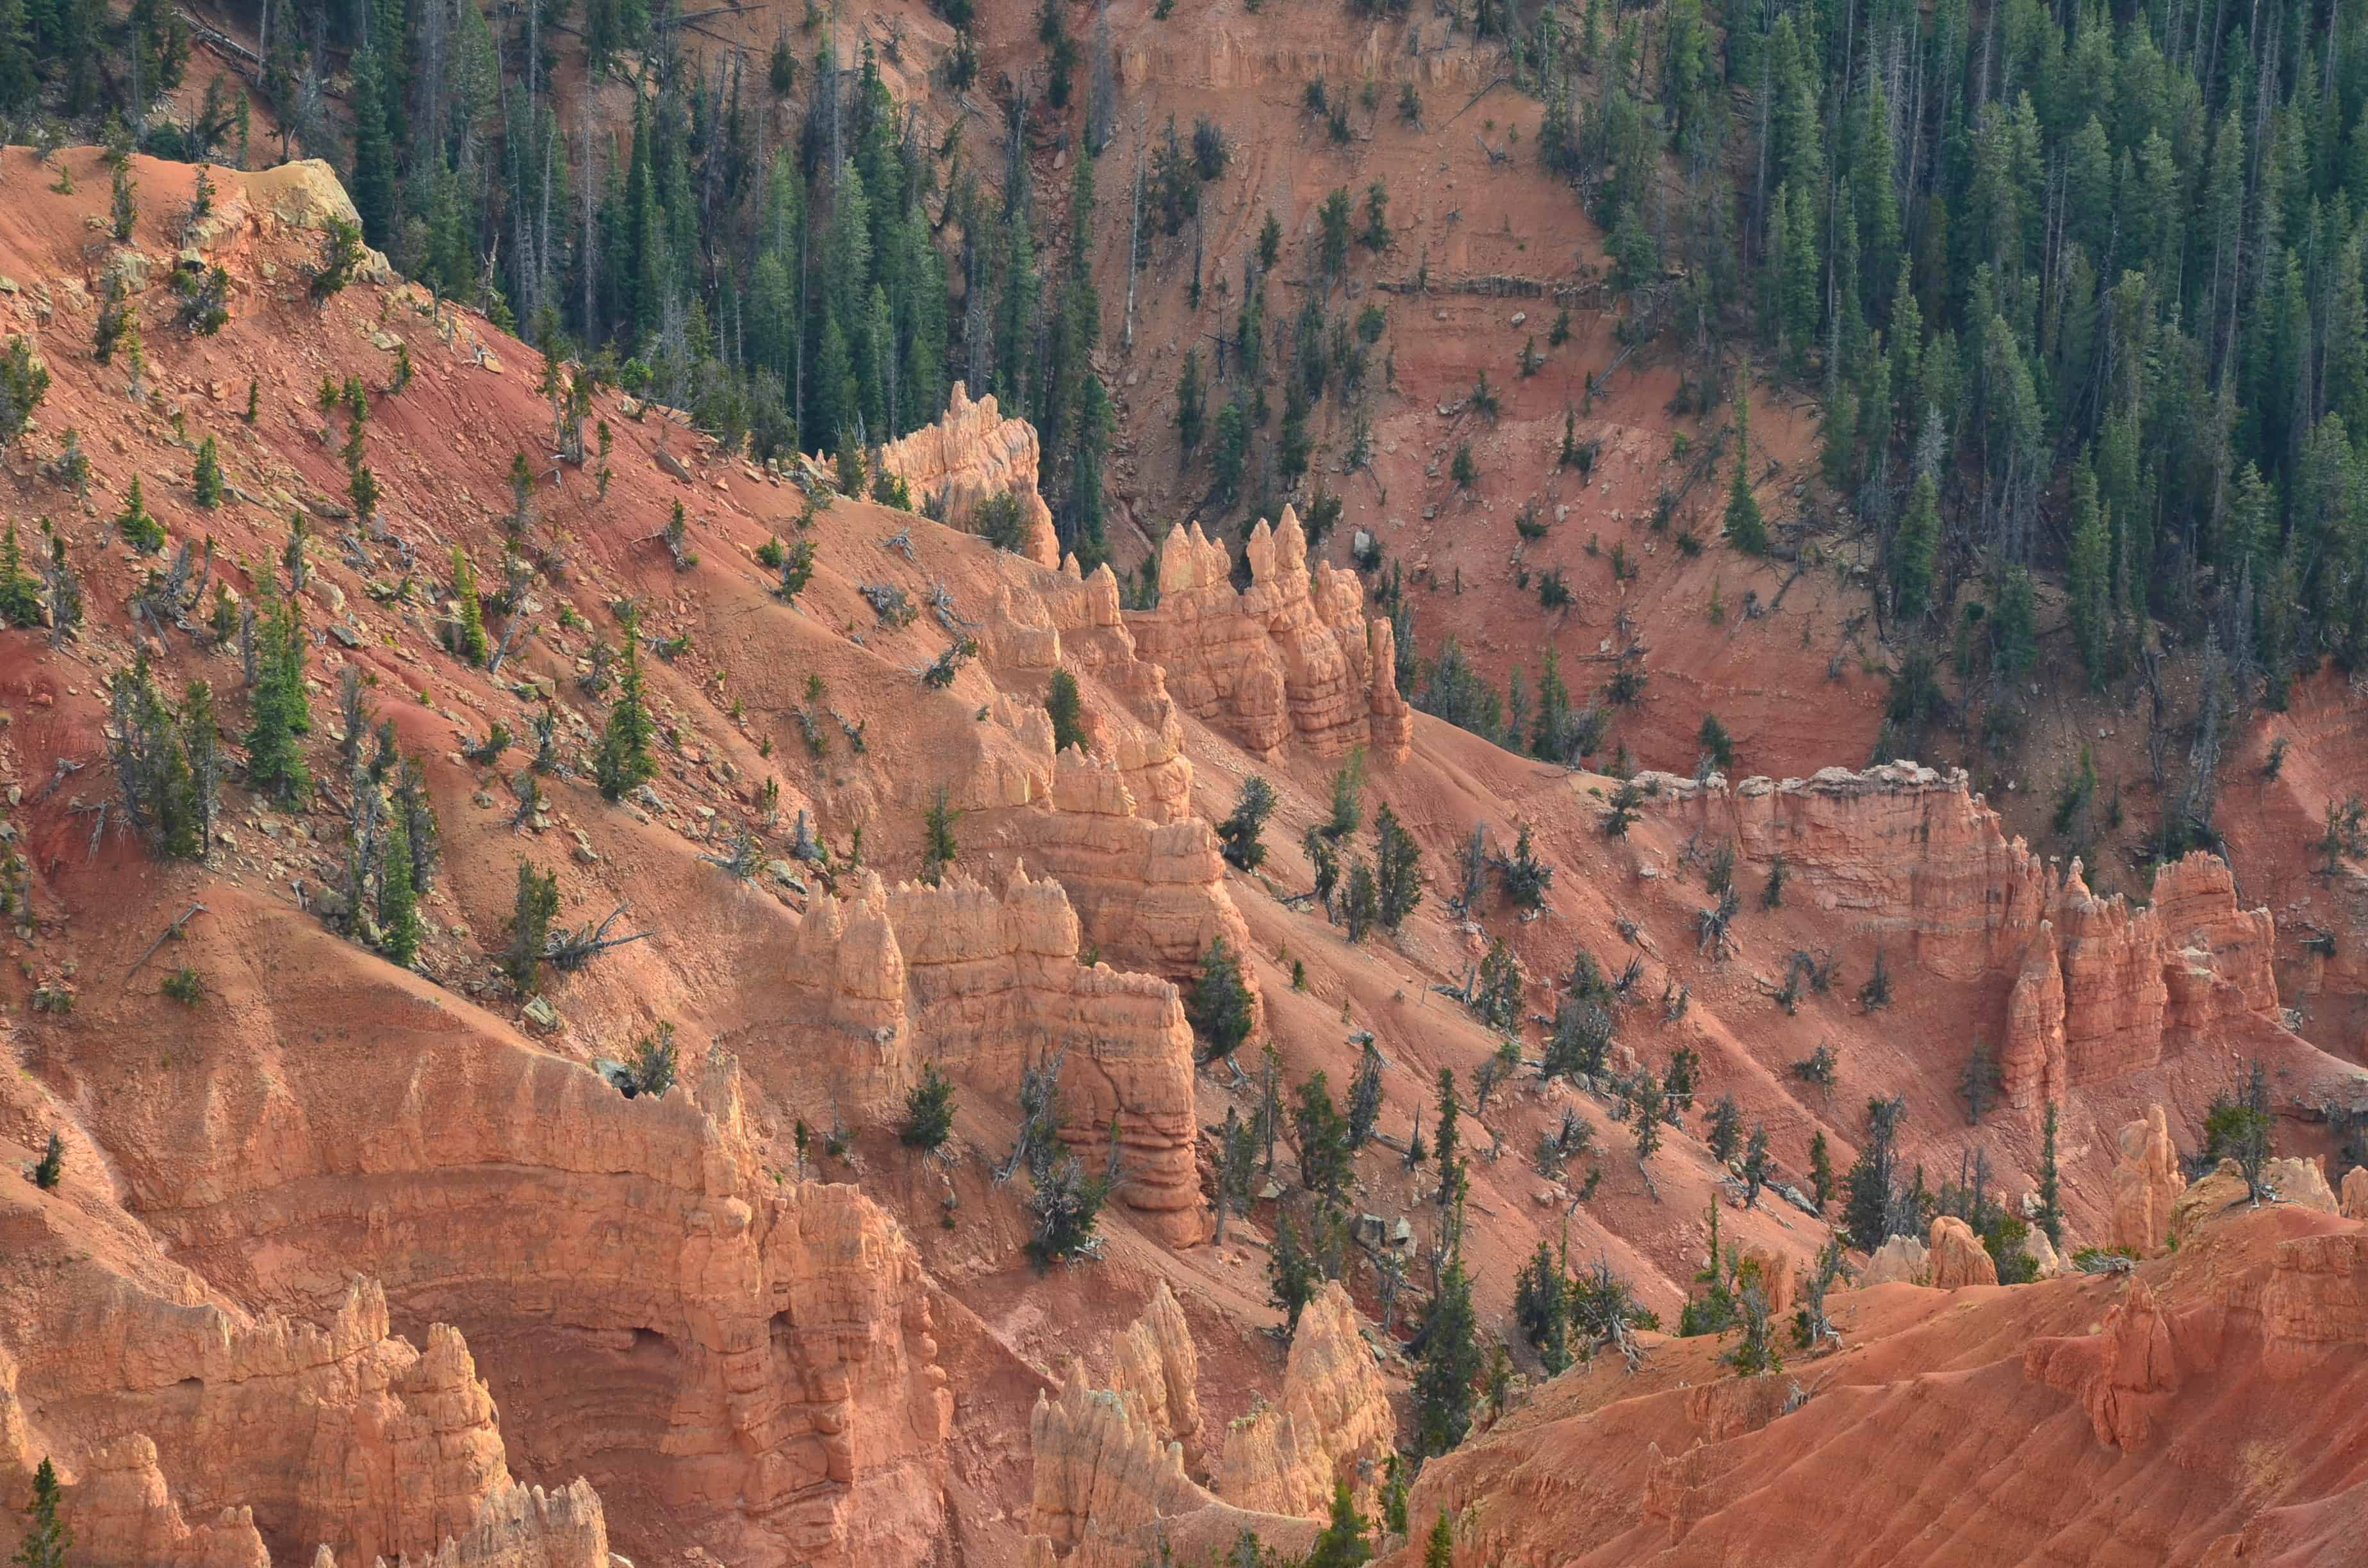 The amphitheater from North View at Cedar Breaks National Monument in Utah